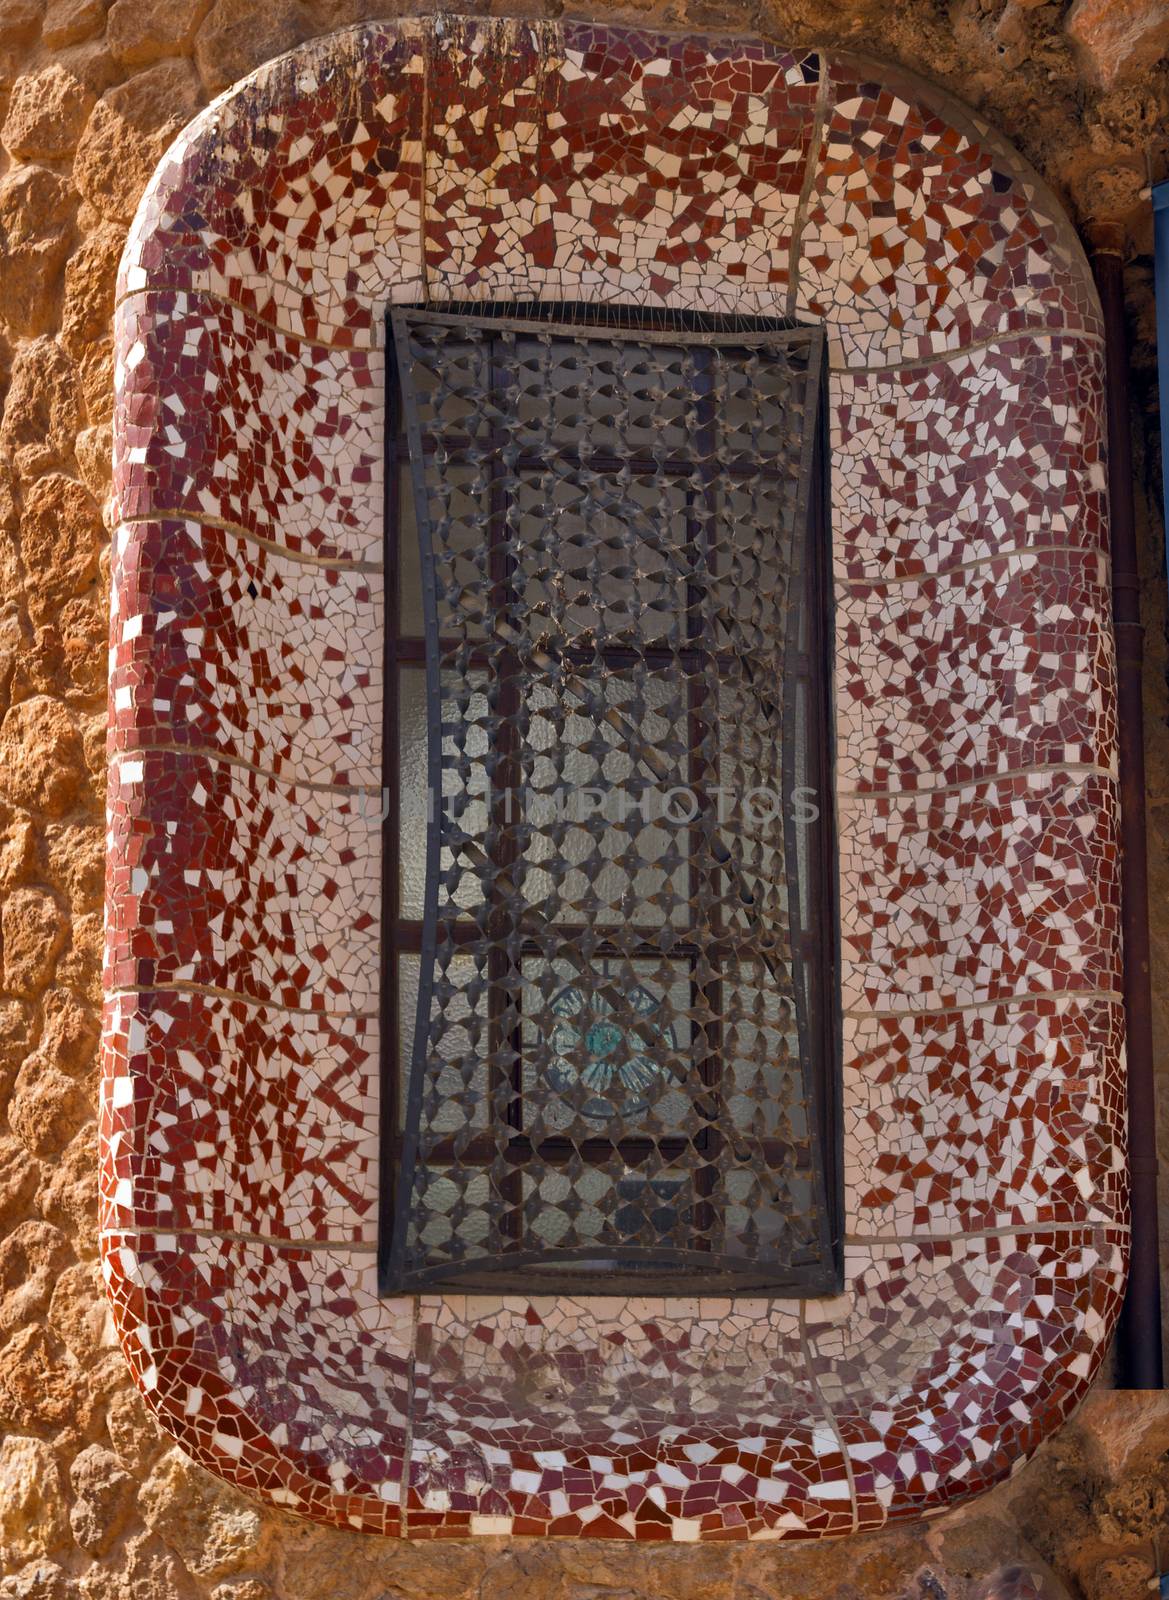 window ceramic tile grunge background covered with tile-shard mosaic, Parc Guell designed by Antoni Gaudi located on Carmel Hill, Barcelona, Spain.